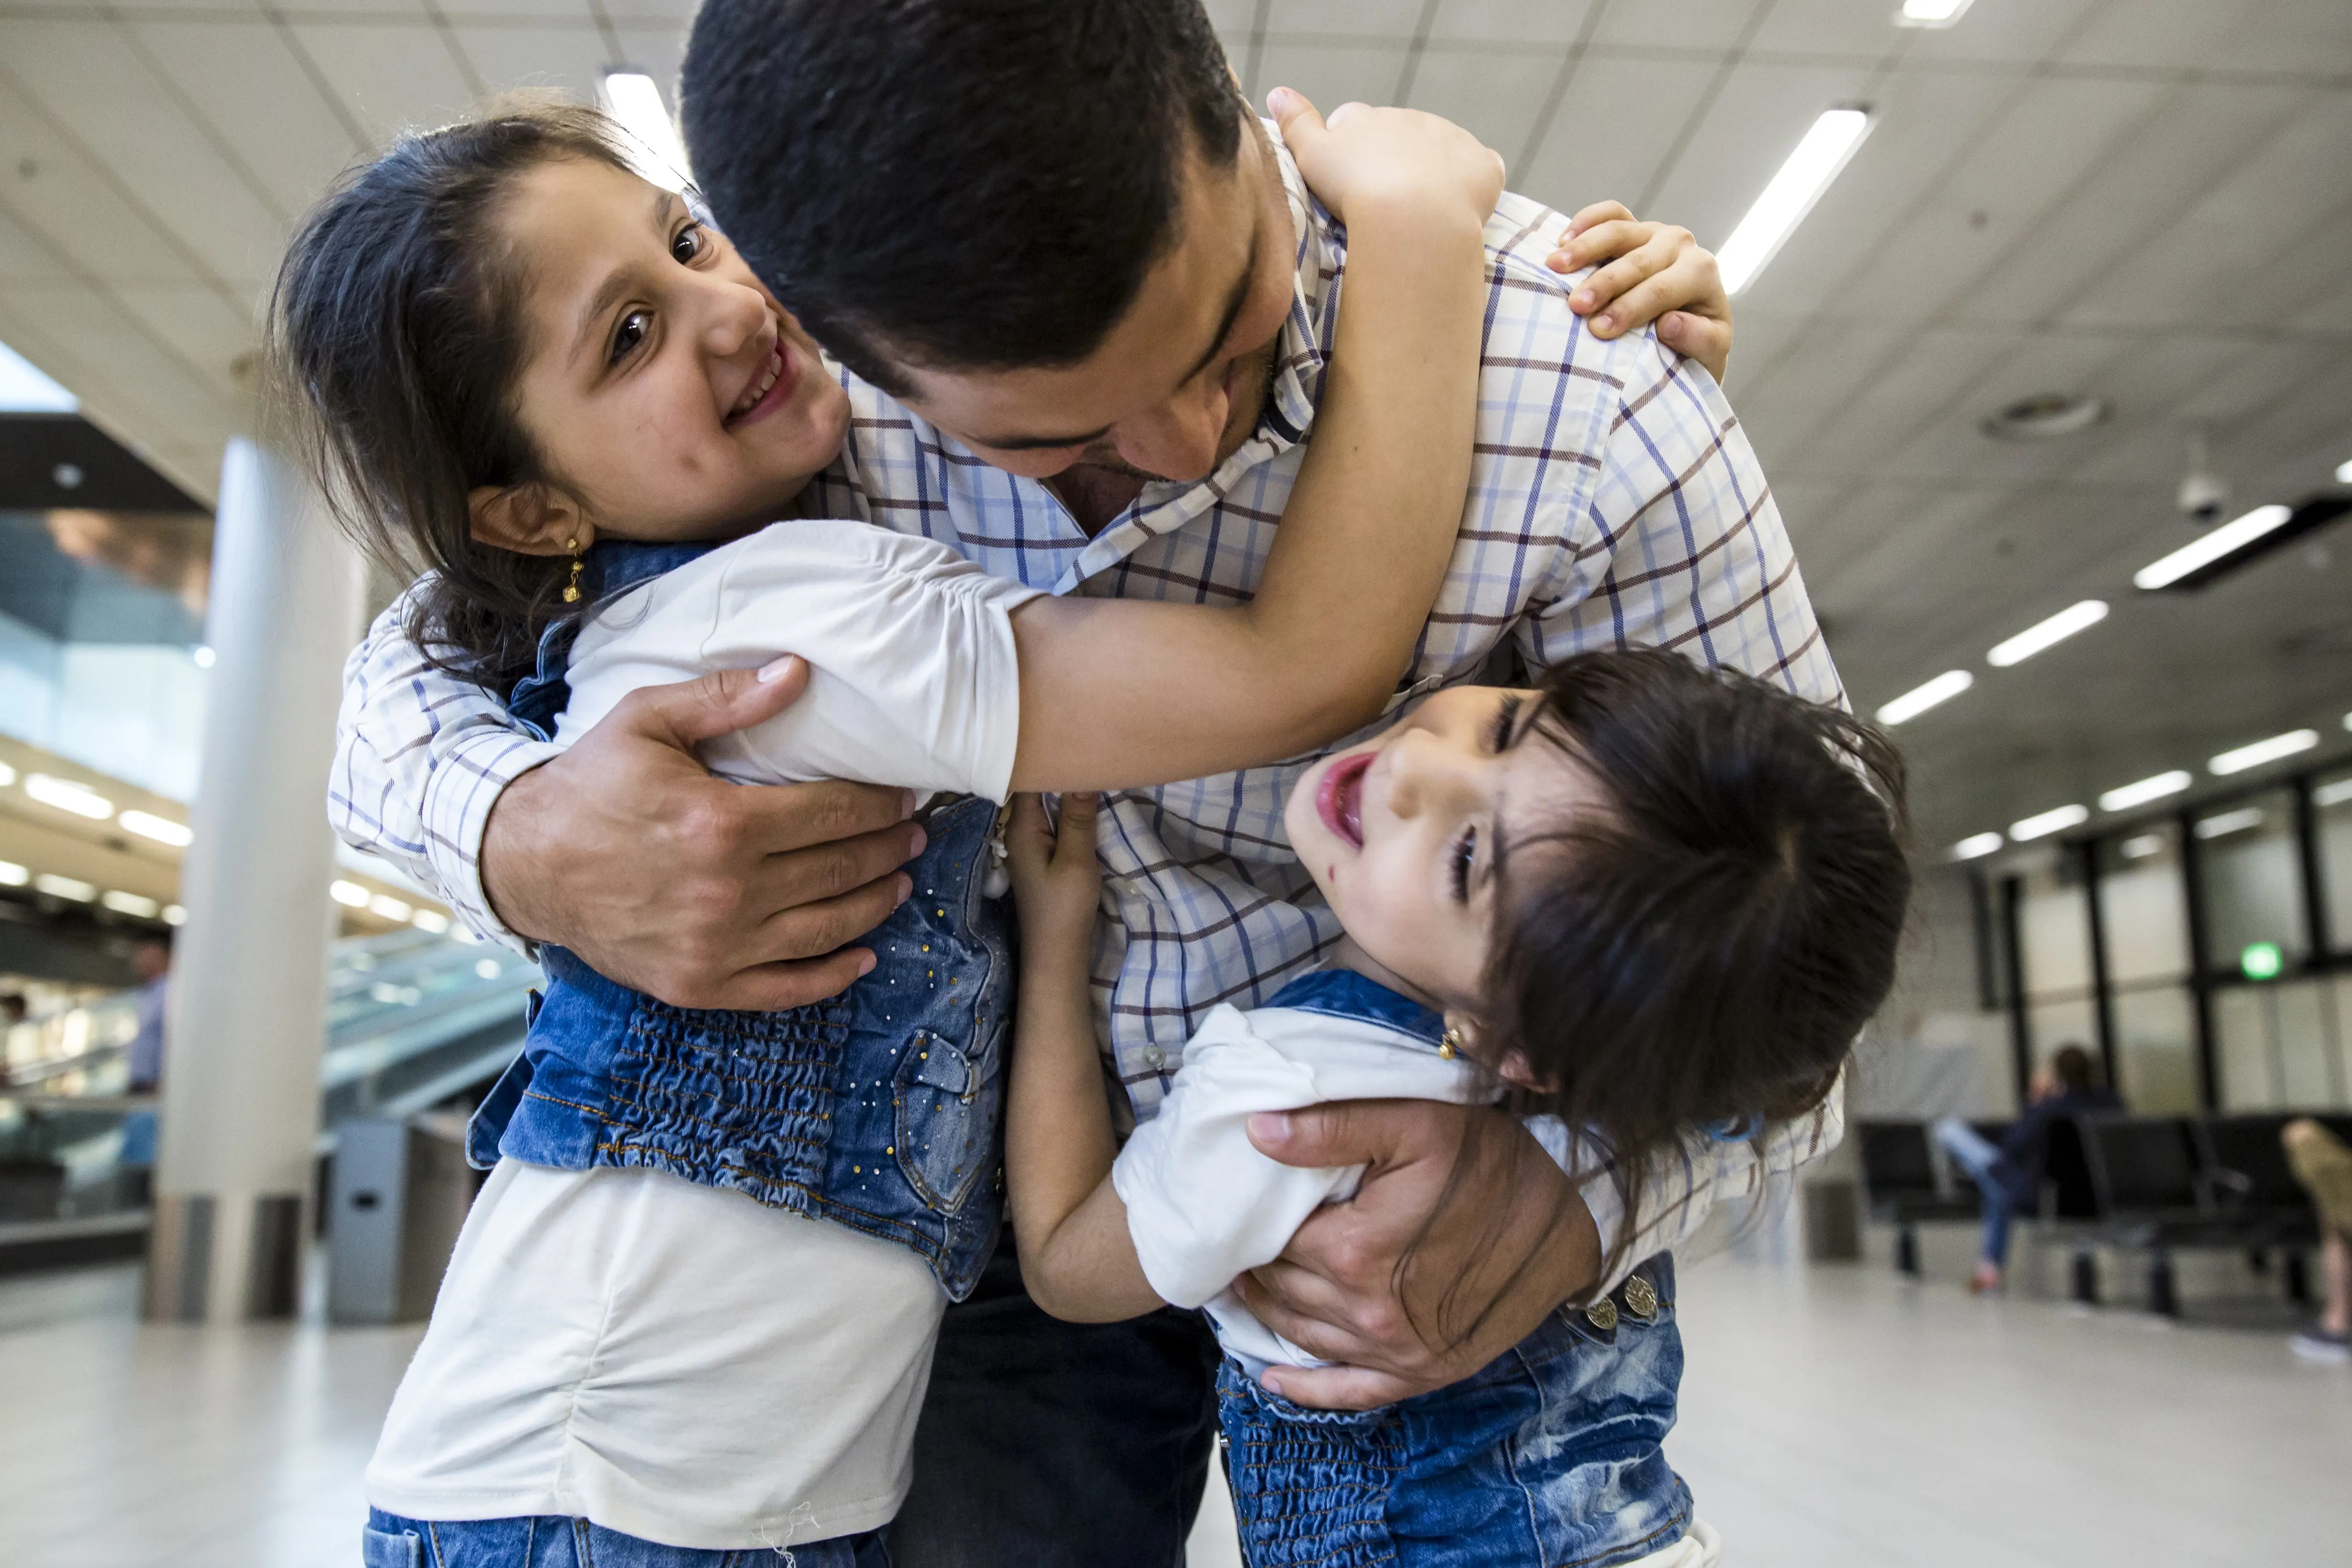 A father can finally hold his two daughters again after family reunification at Schiphol Airport.